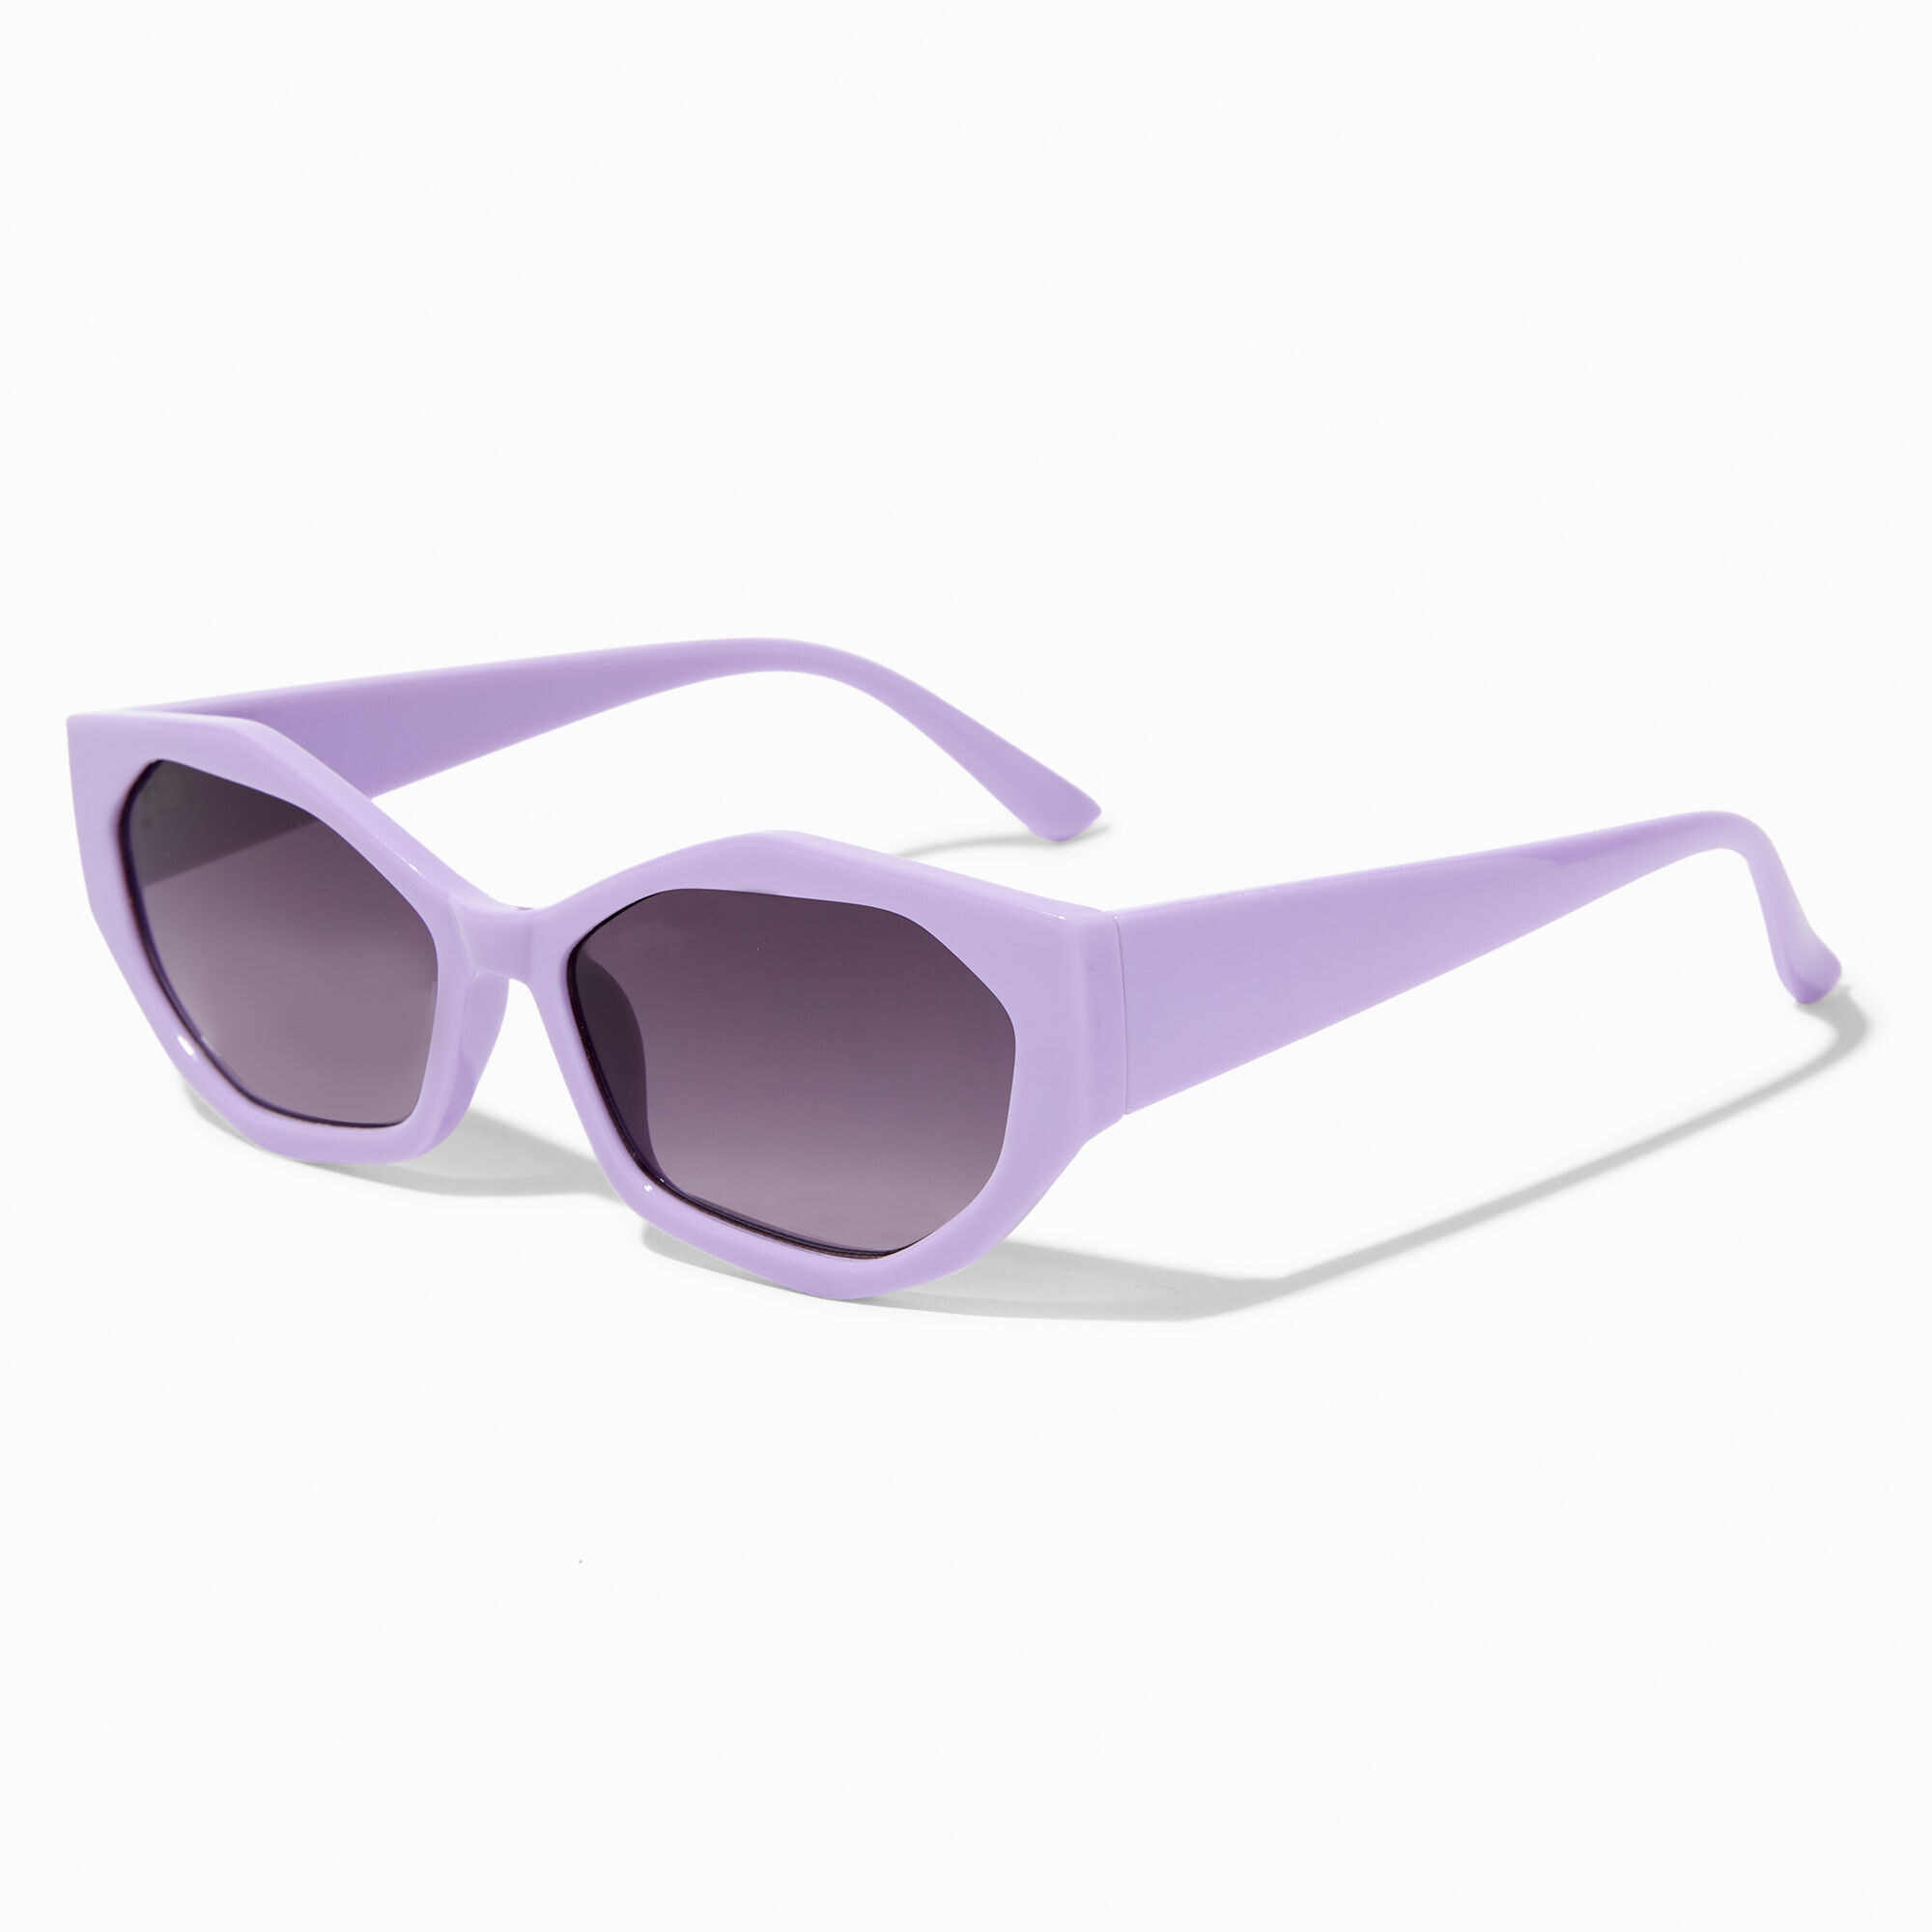 View Claires Chunky Lavender Geometric Sunglasses information